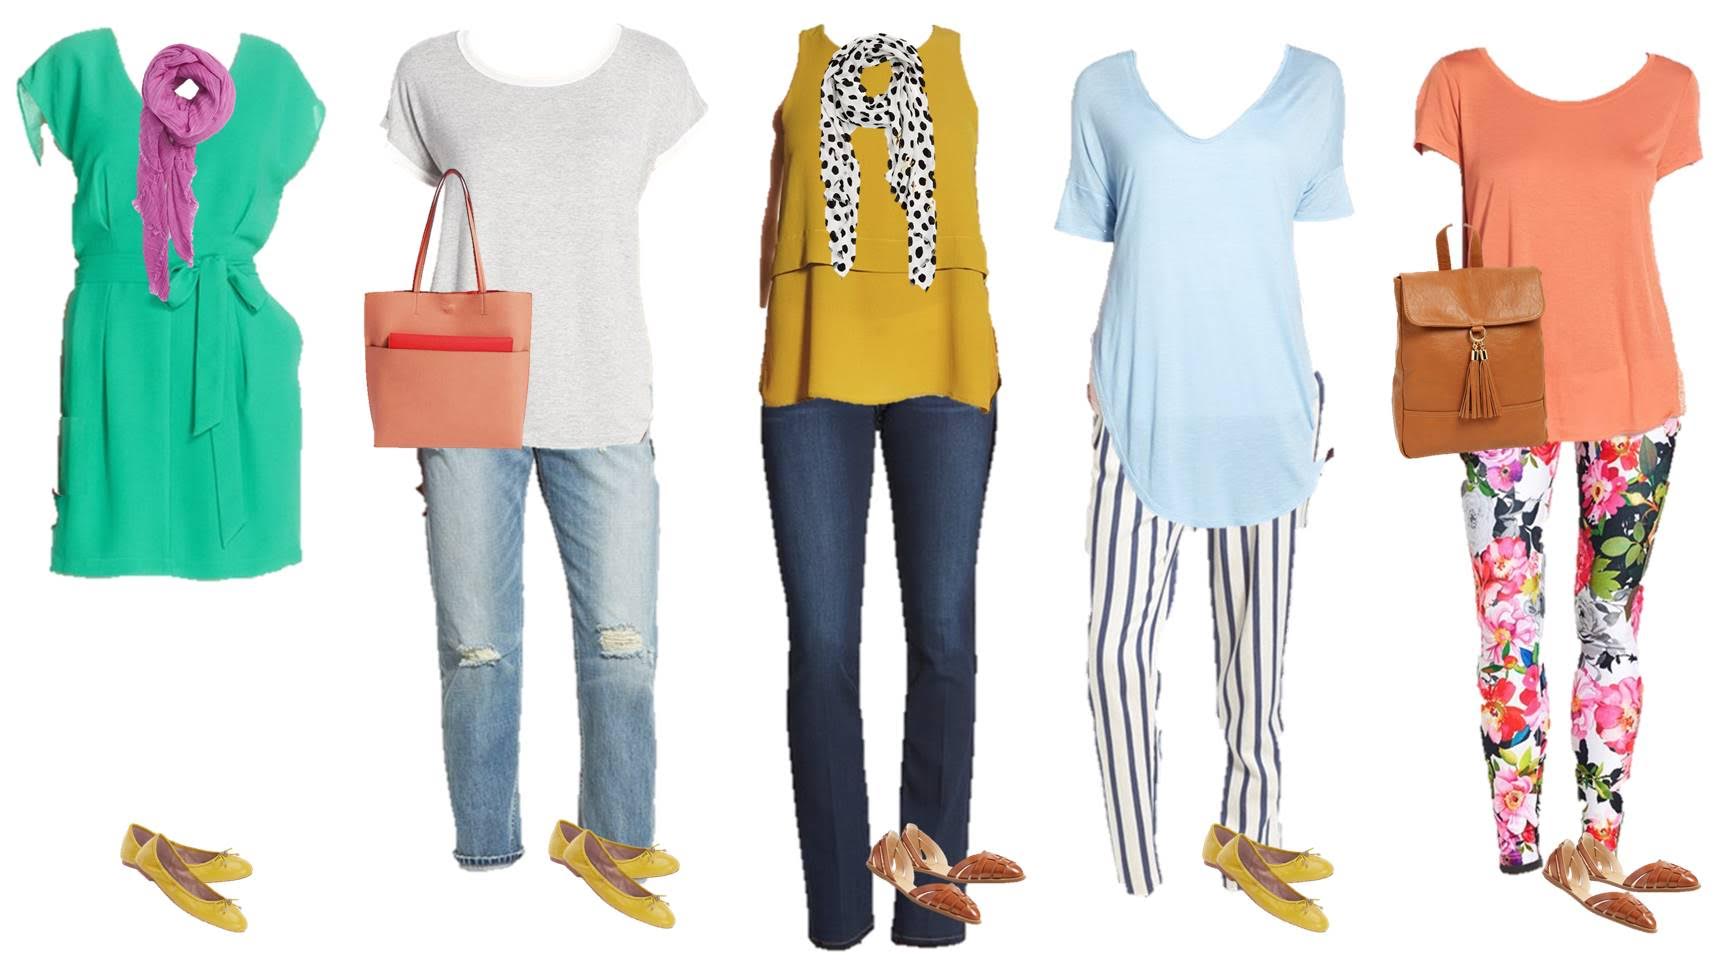 Fabulous Mix & Match Spring Styles from Nordstrom 3